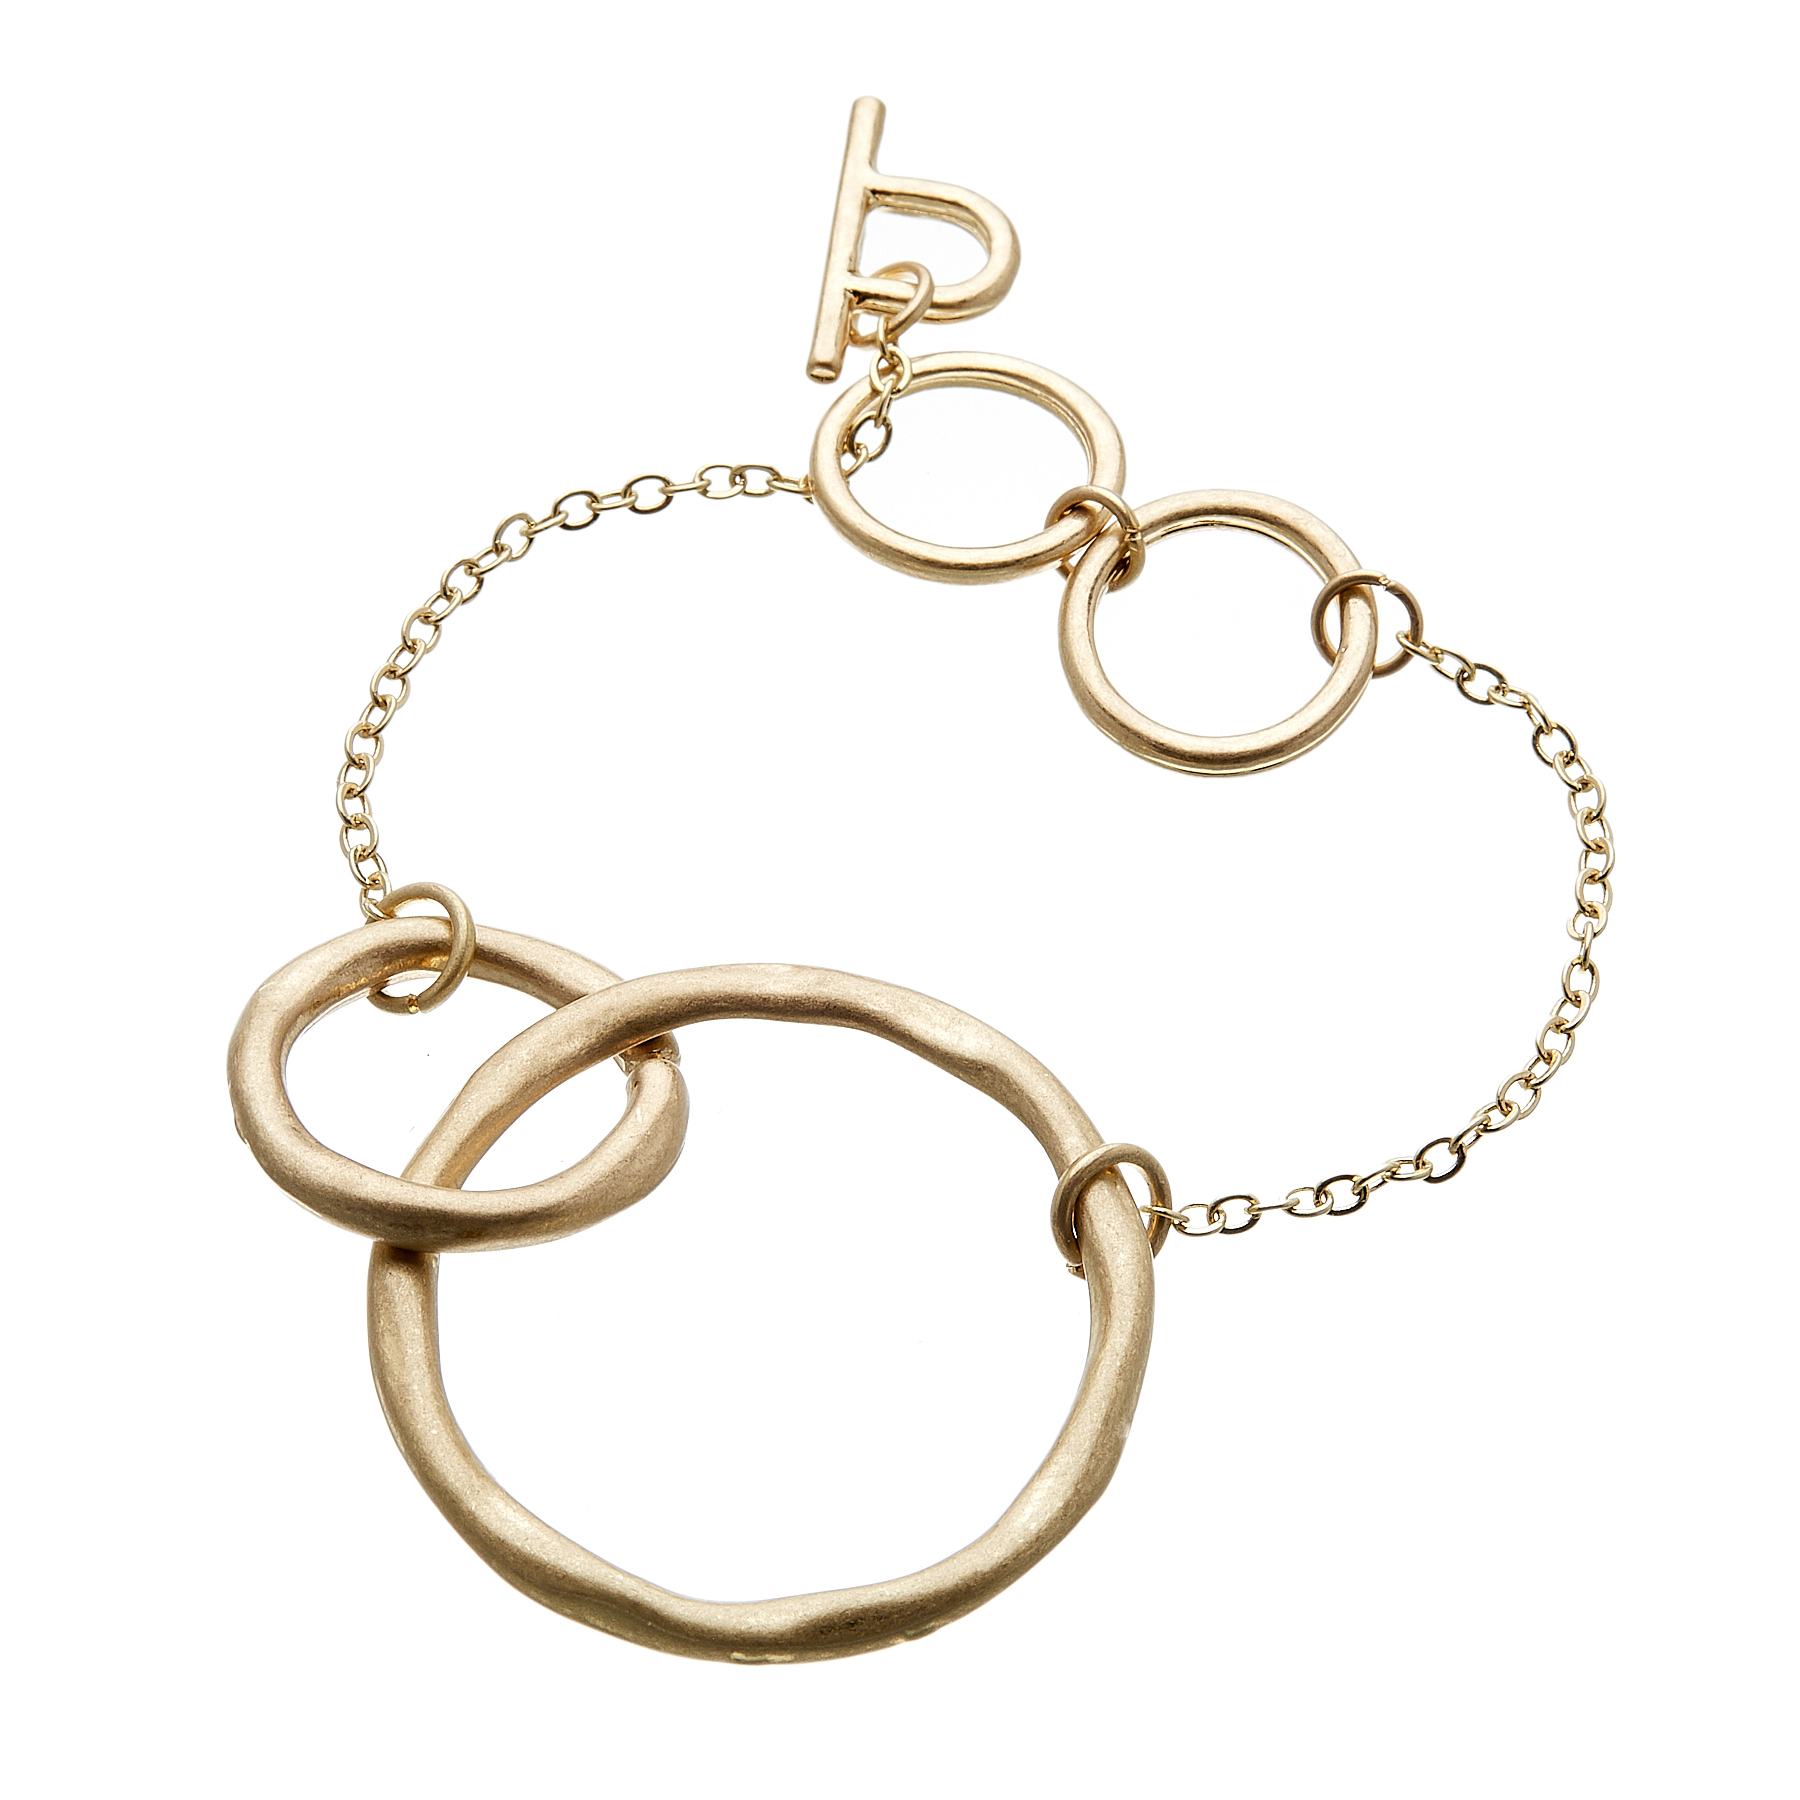 Matt gold T bar Bracelet with chain linked connecting circles - Jamia